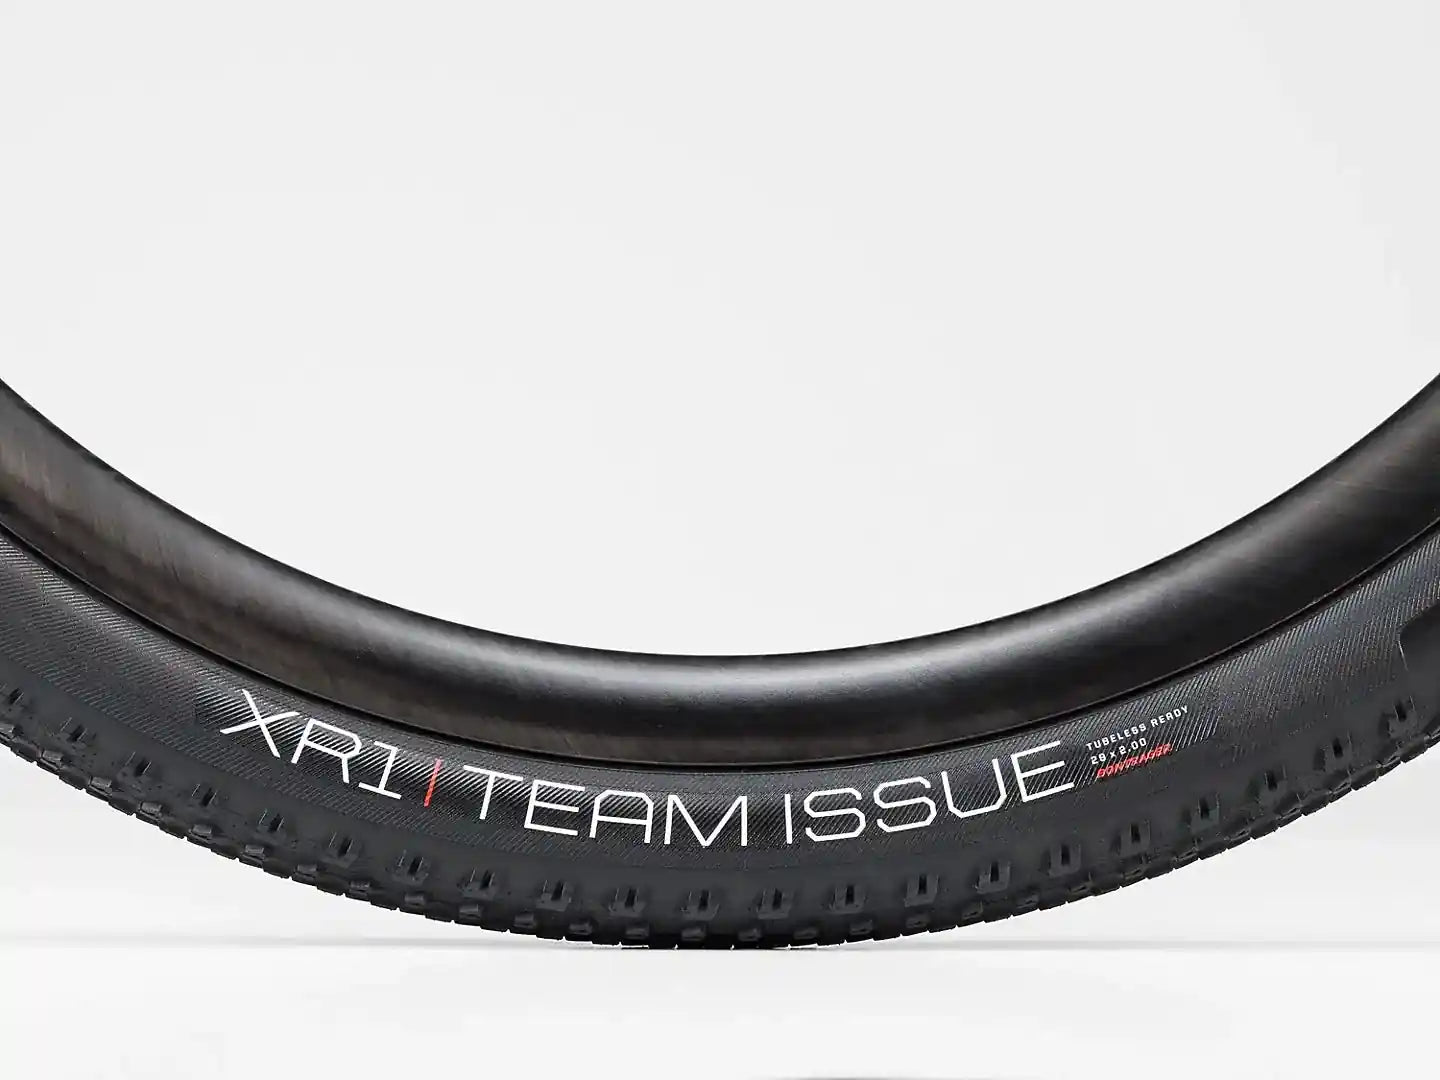 Tyre Bontrager XR1 Team Issue TLR Mountain Wheels Bikes